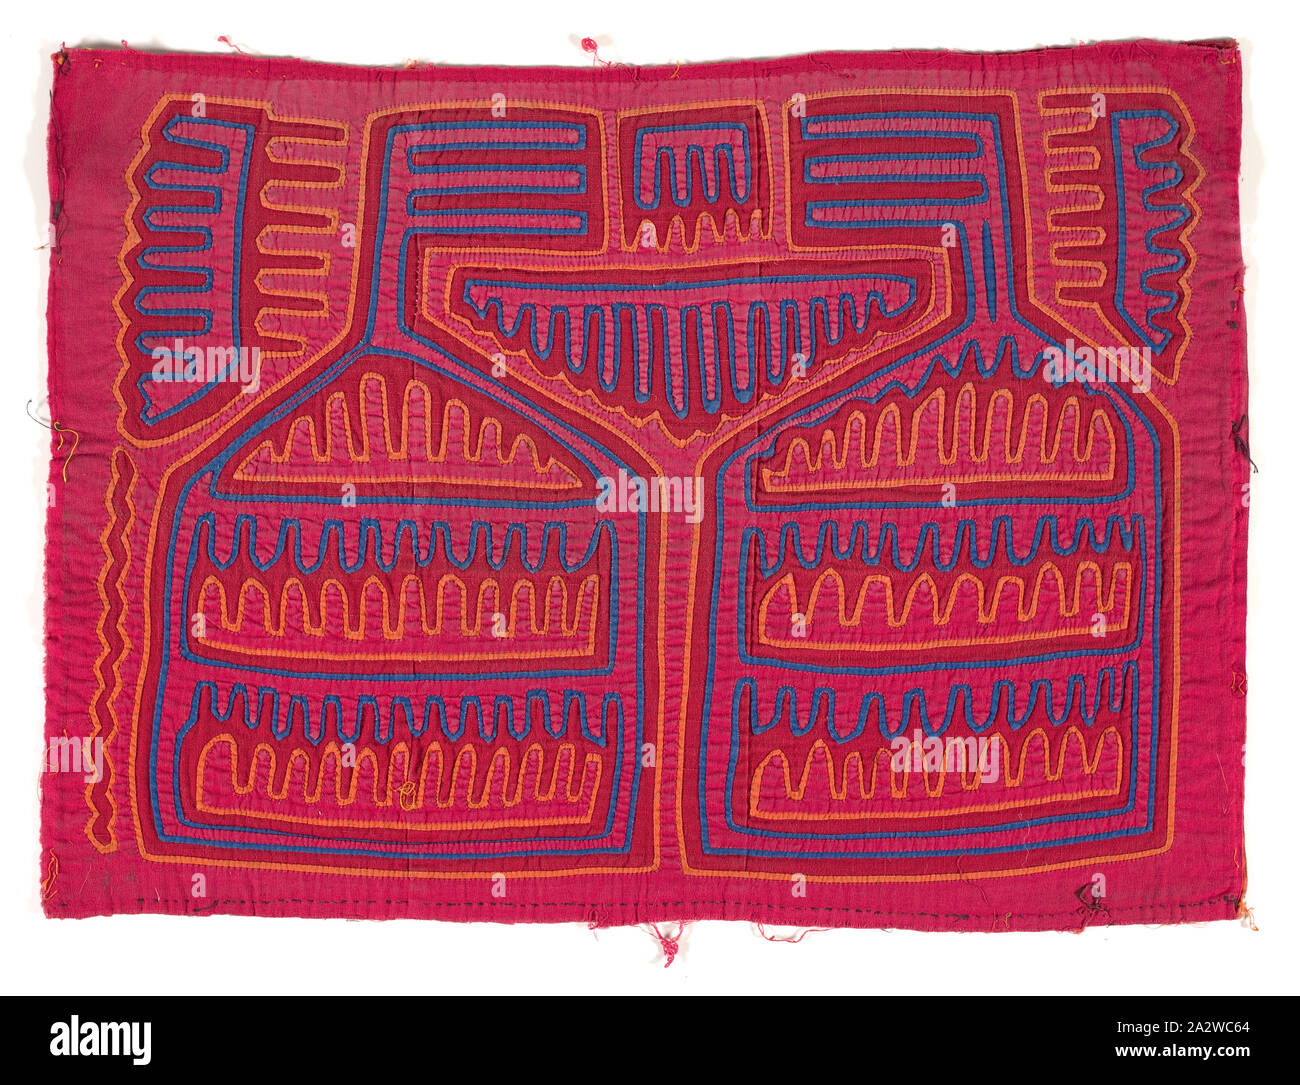 shirt panel (mola), Kuna people, about 1950s, appliqued cotton, 14-3/4 x 20-1/8 in., Textile and Fashion Arts Stock Photo